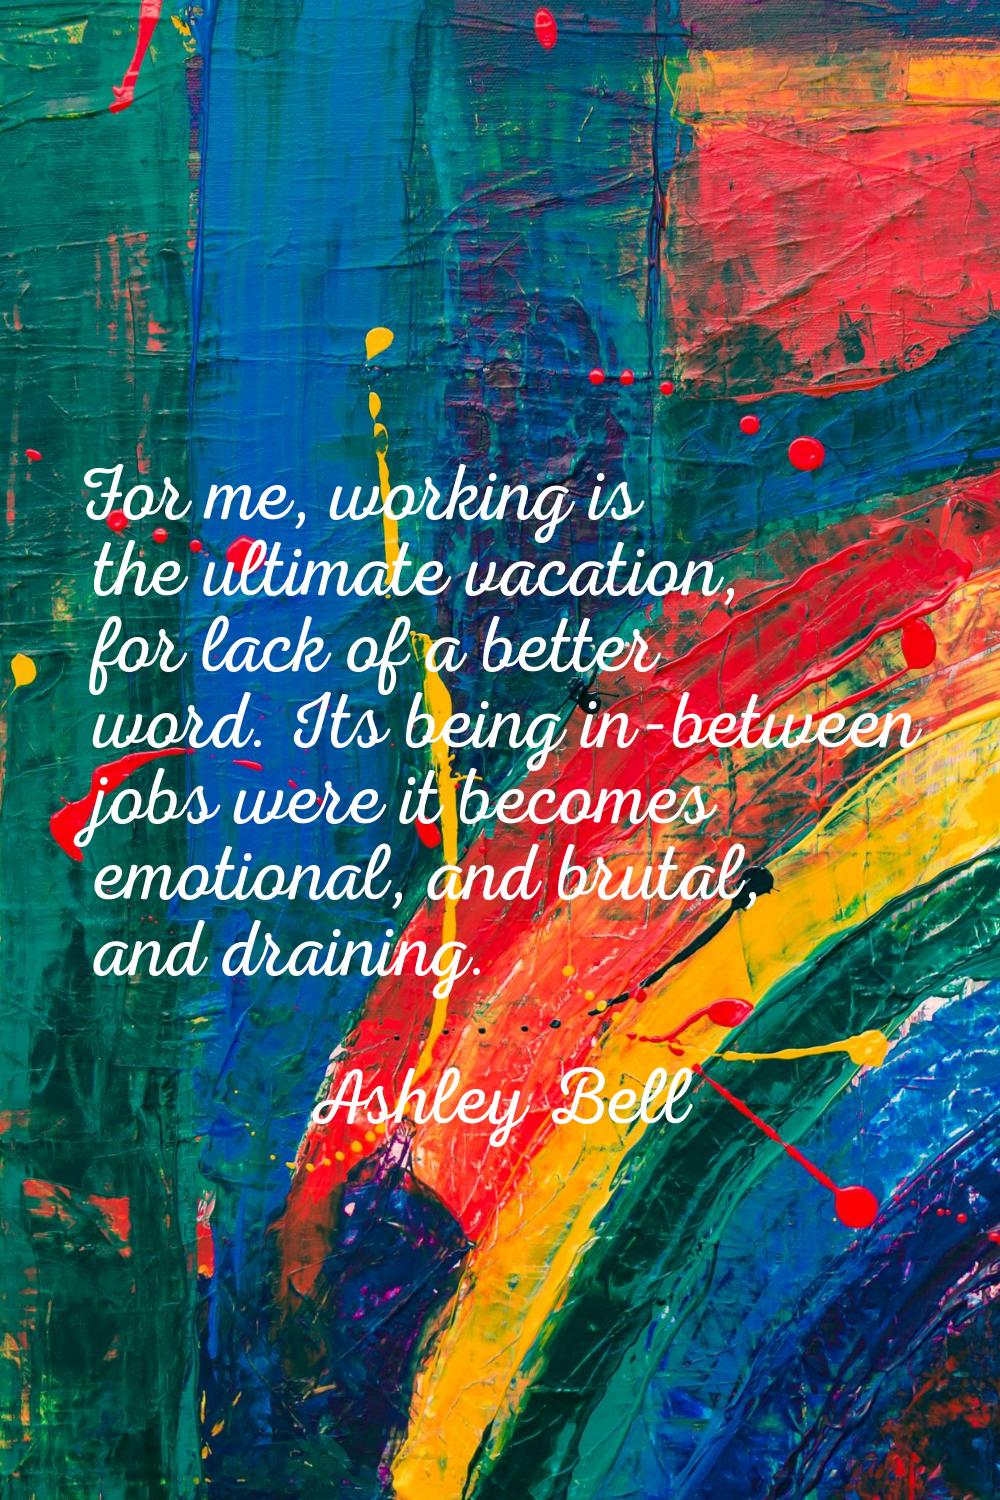 For me, working is the ultimate vacation, for lack of a better word. Its being in-between jobs were